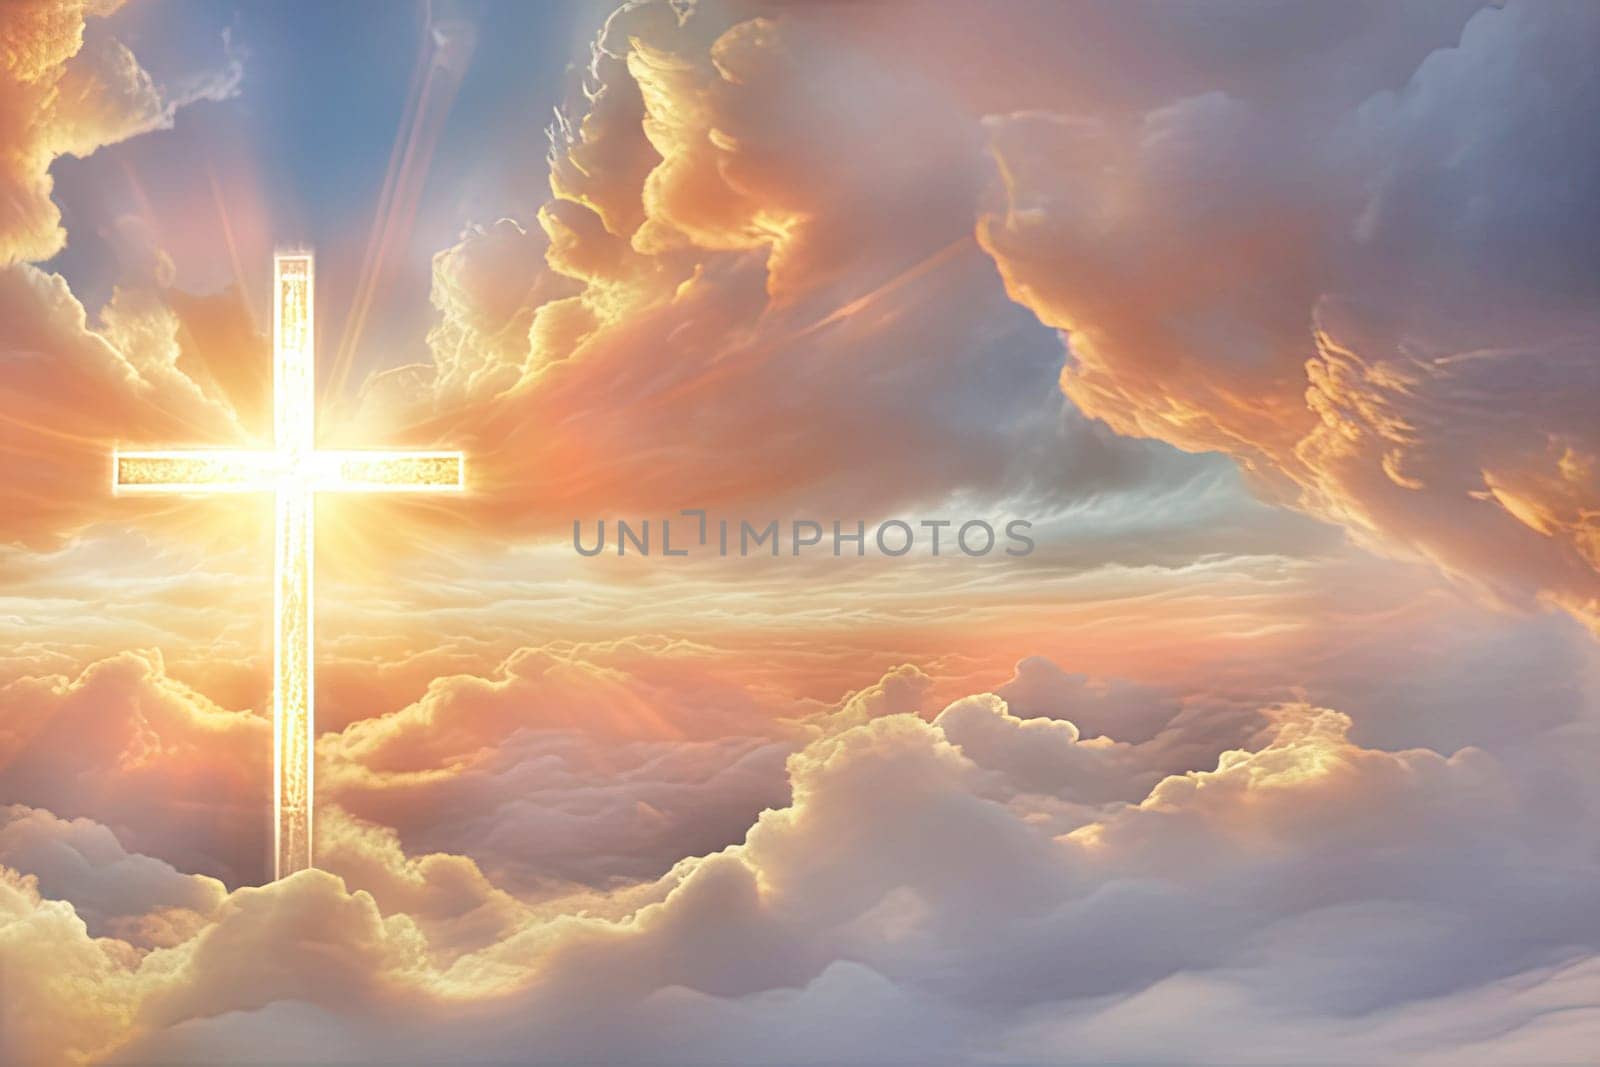 Christian cross and divine light through the clouds in sky, enchanting light and peach fuzz tones on heaven, religion concept